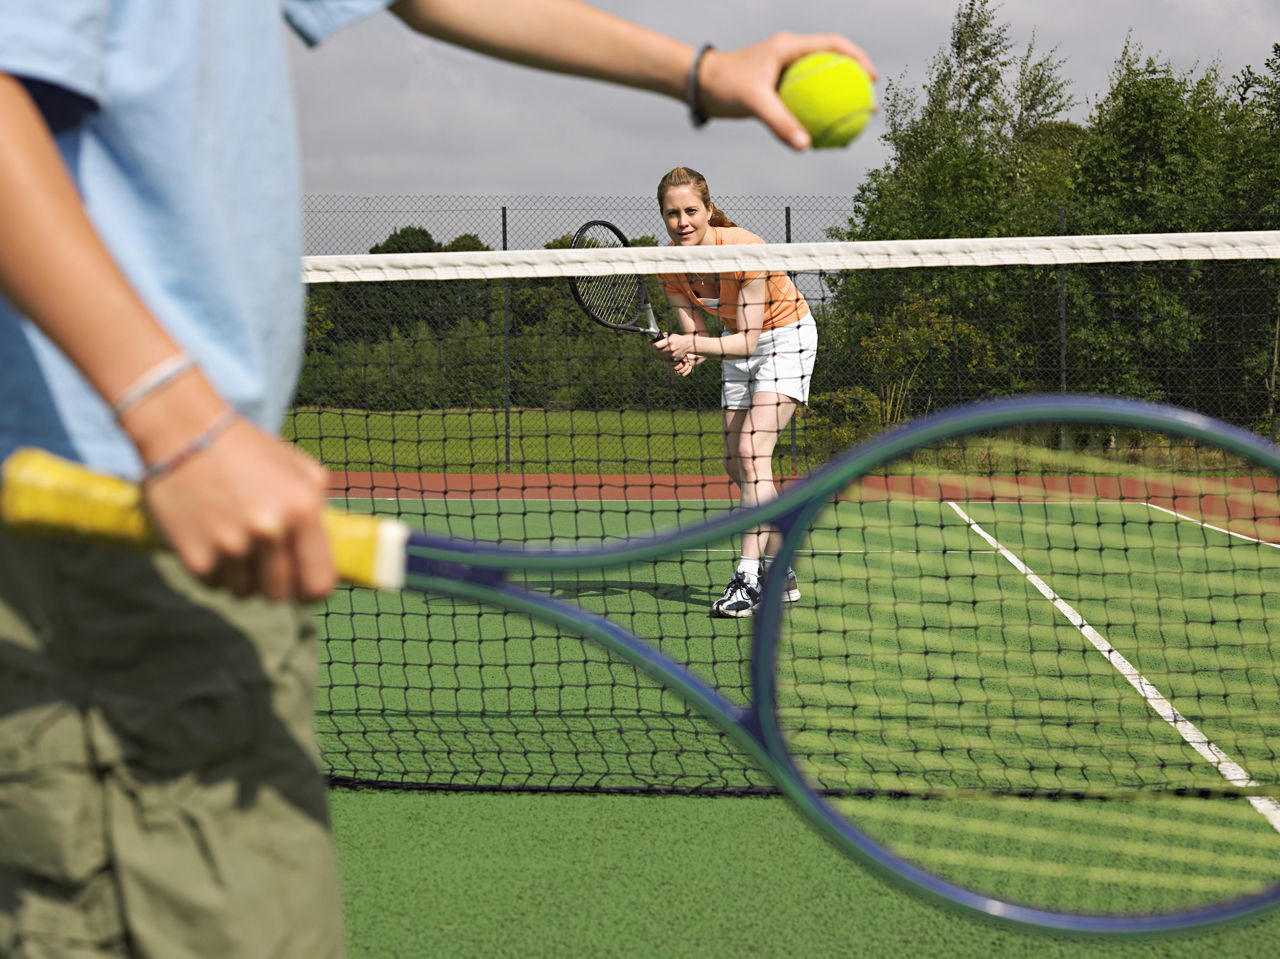 We play tennis when. Куркино спорт теннис. They Play Tennis. They're playing Tennis. How to Play Tennis.